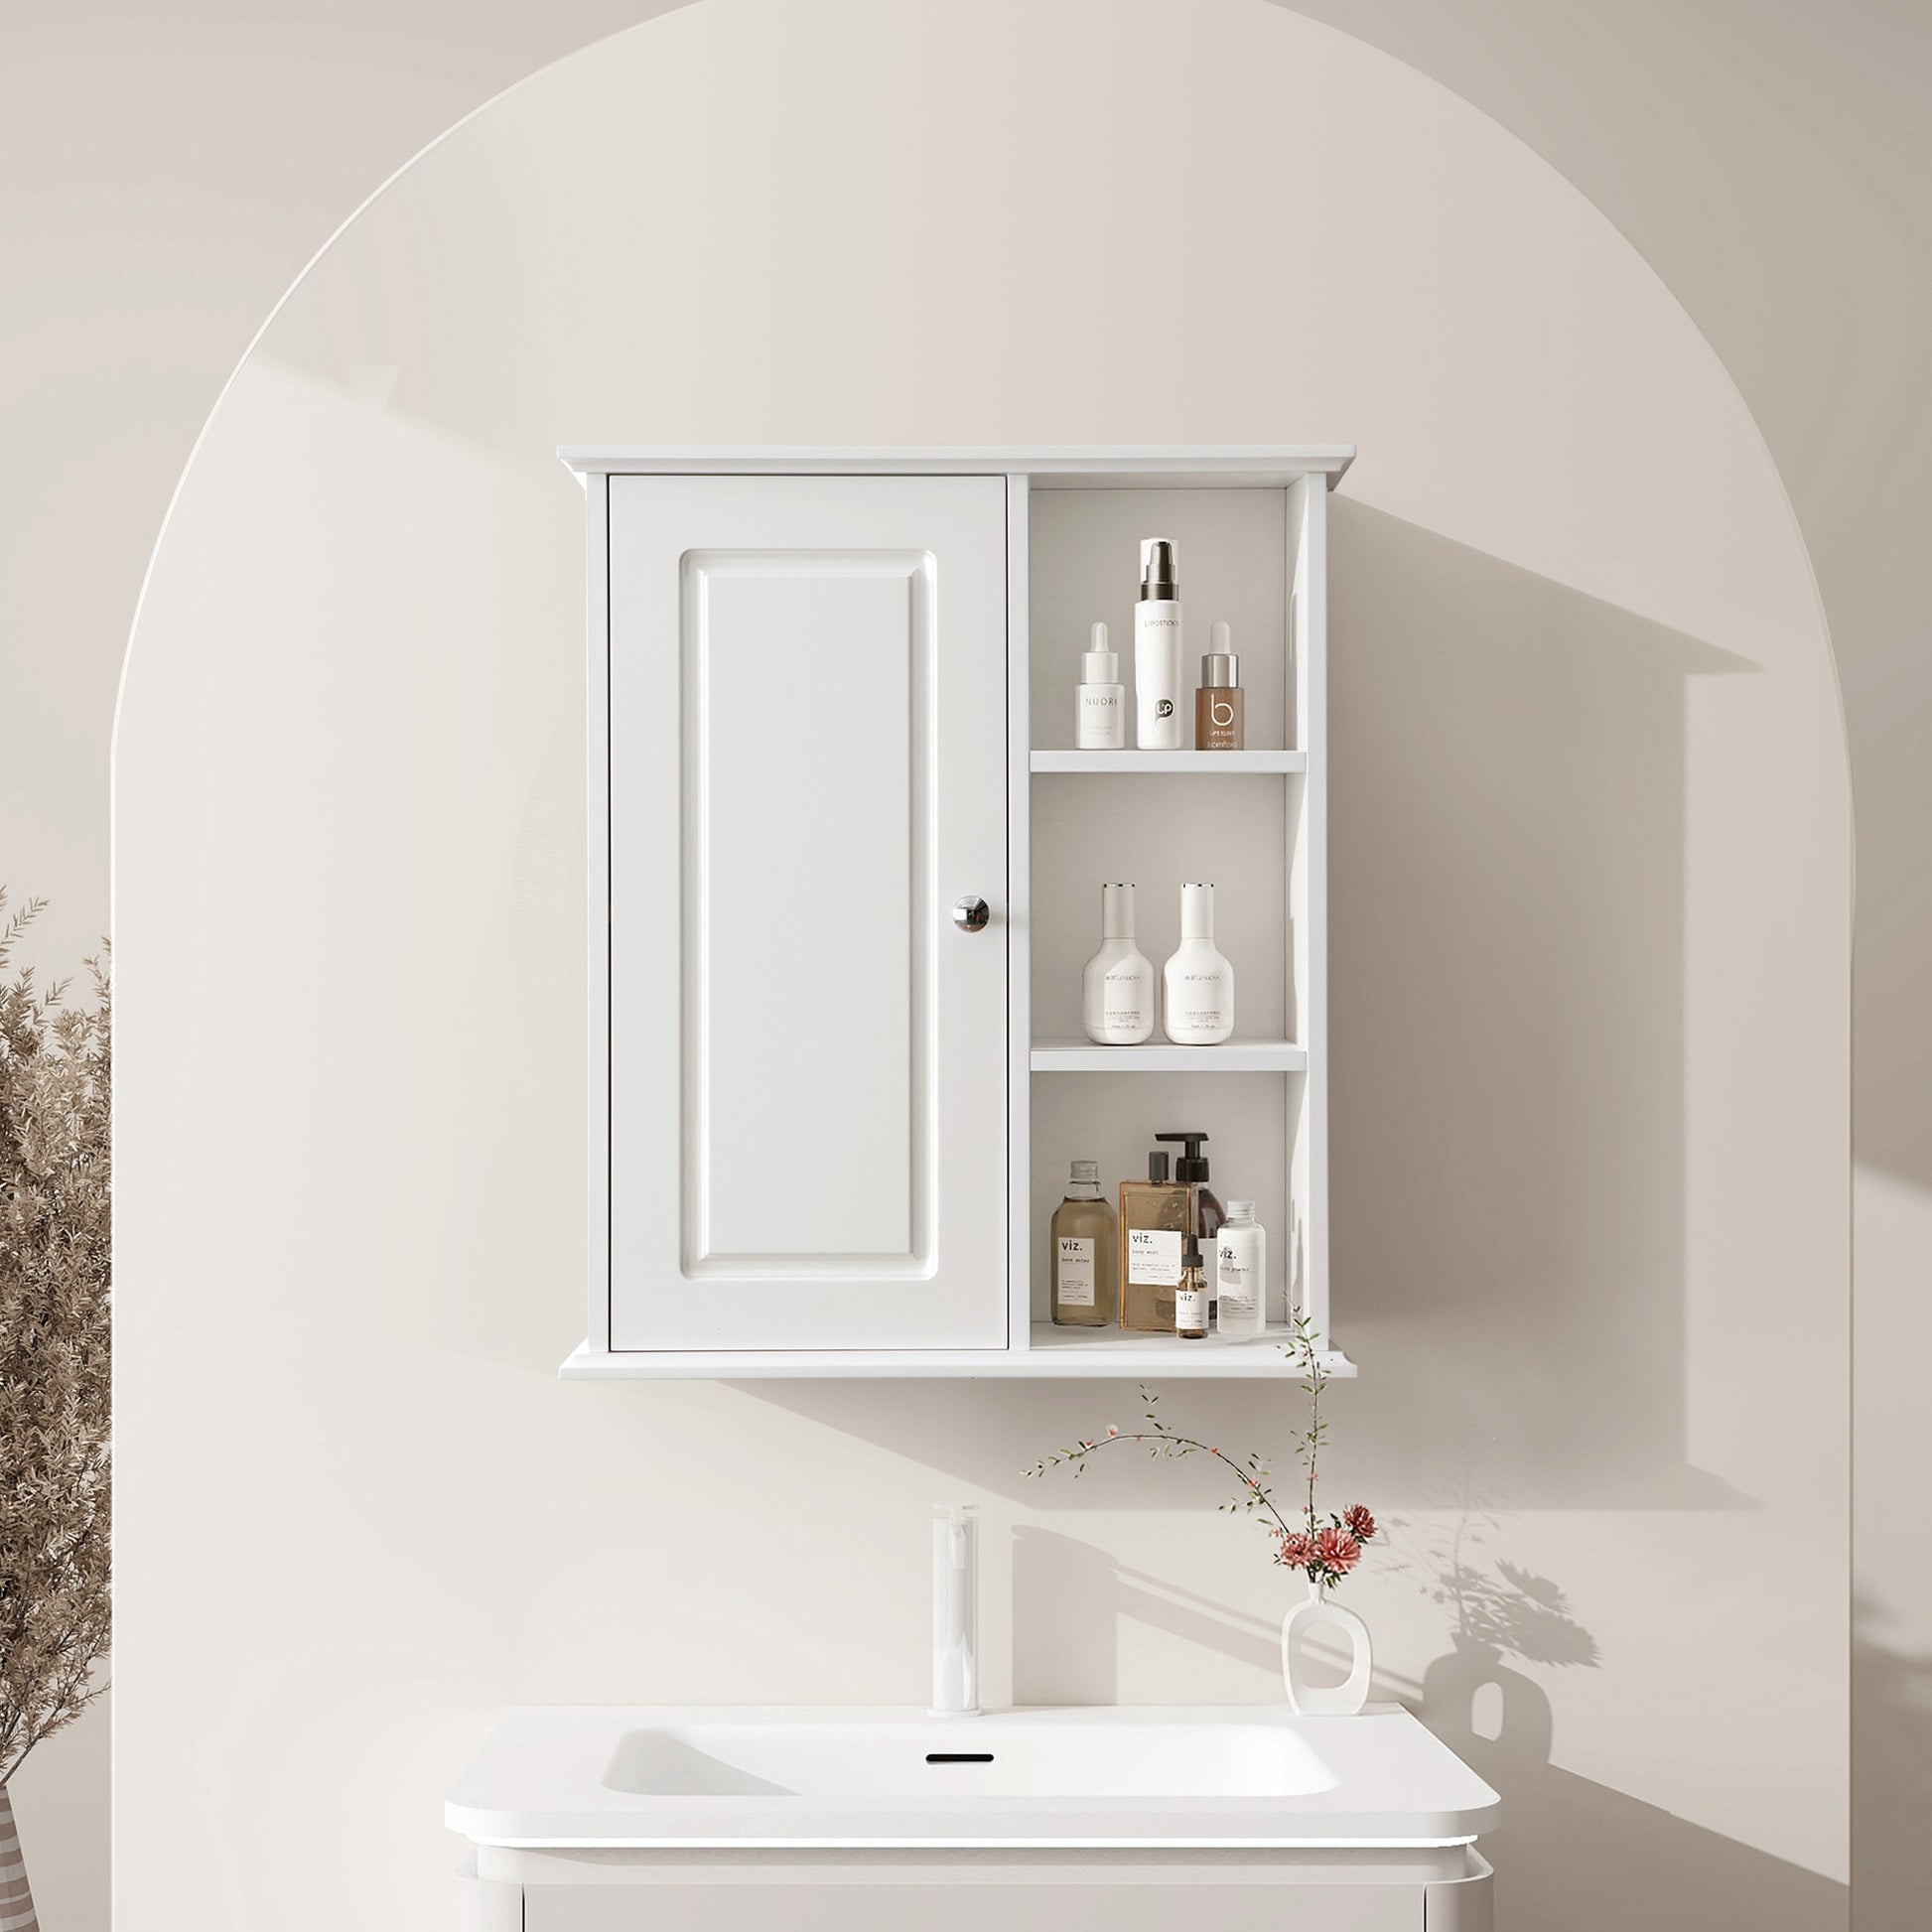 Bathroom Wall Cabinet in Black Ready to Assemble white-1-3-soft close doors-wall